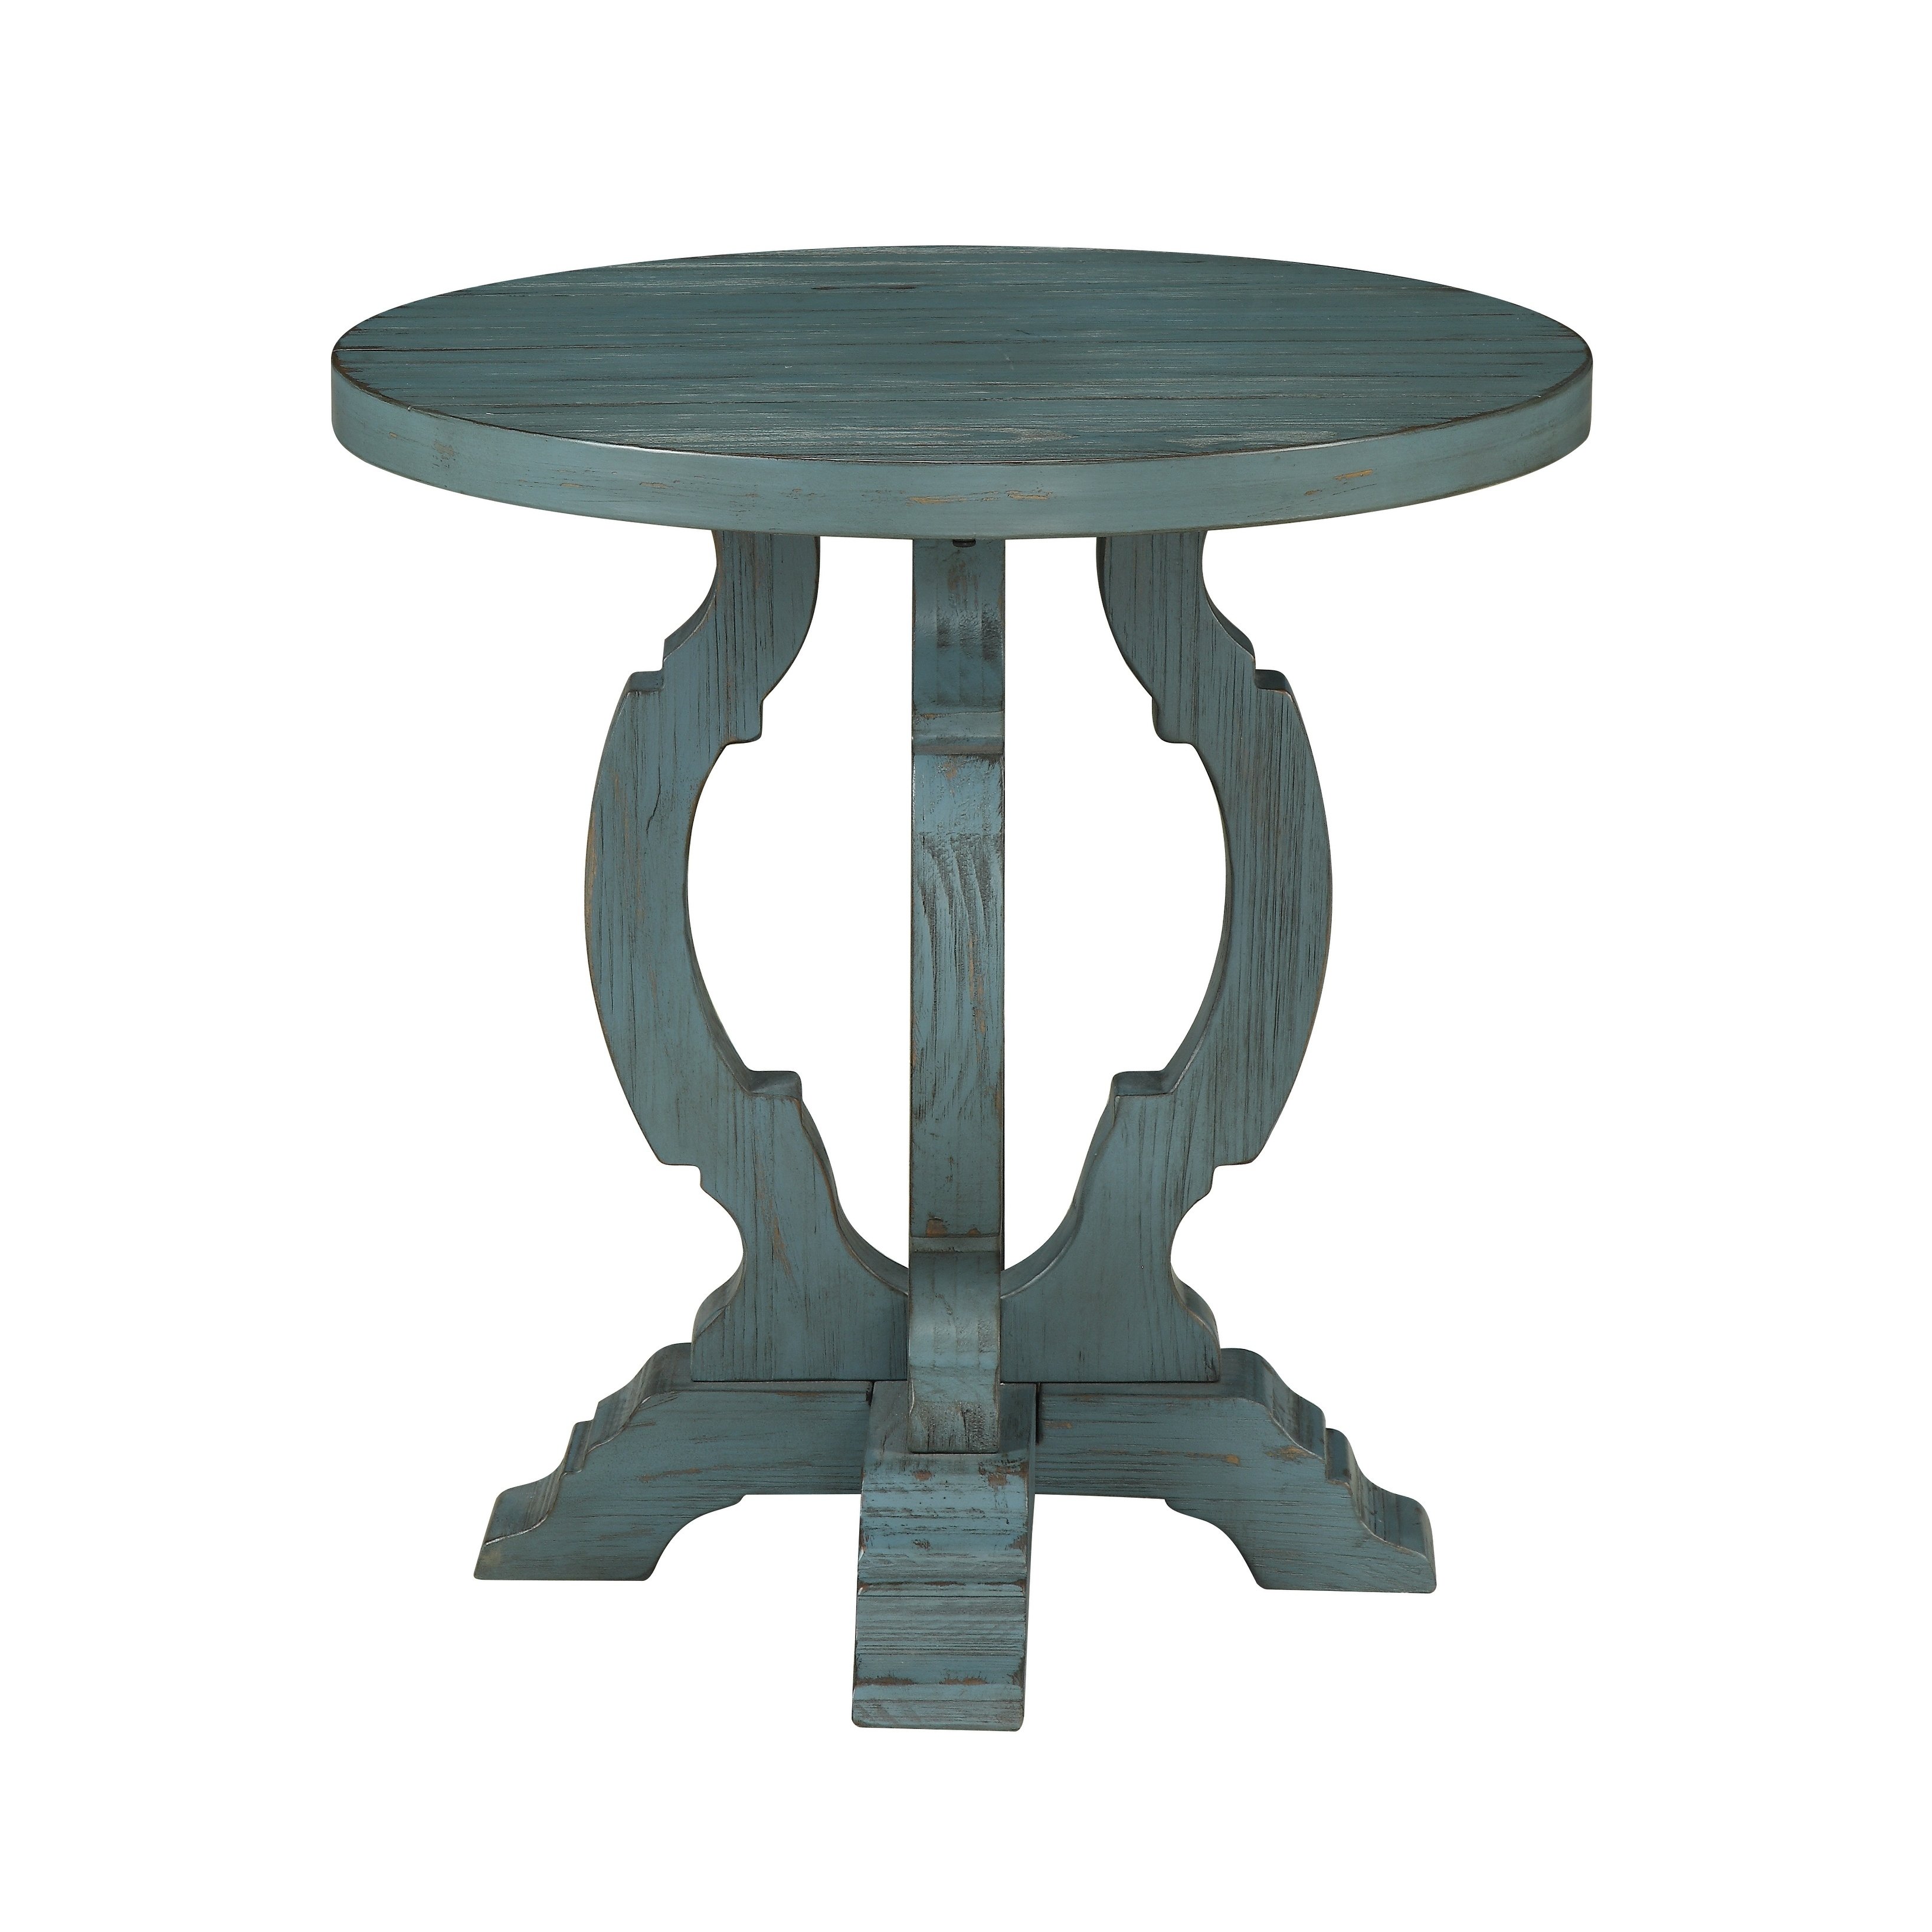 somette orchard blue rub park accent table free freya round shipping today ethan allen lamps modern vintage furniture lamp base concrete coffee build small pier baskets target